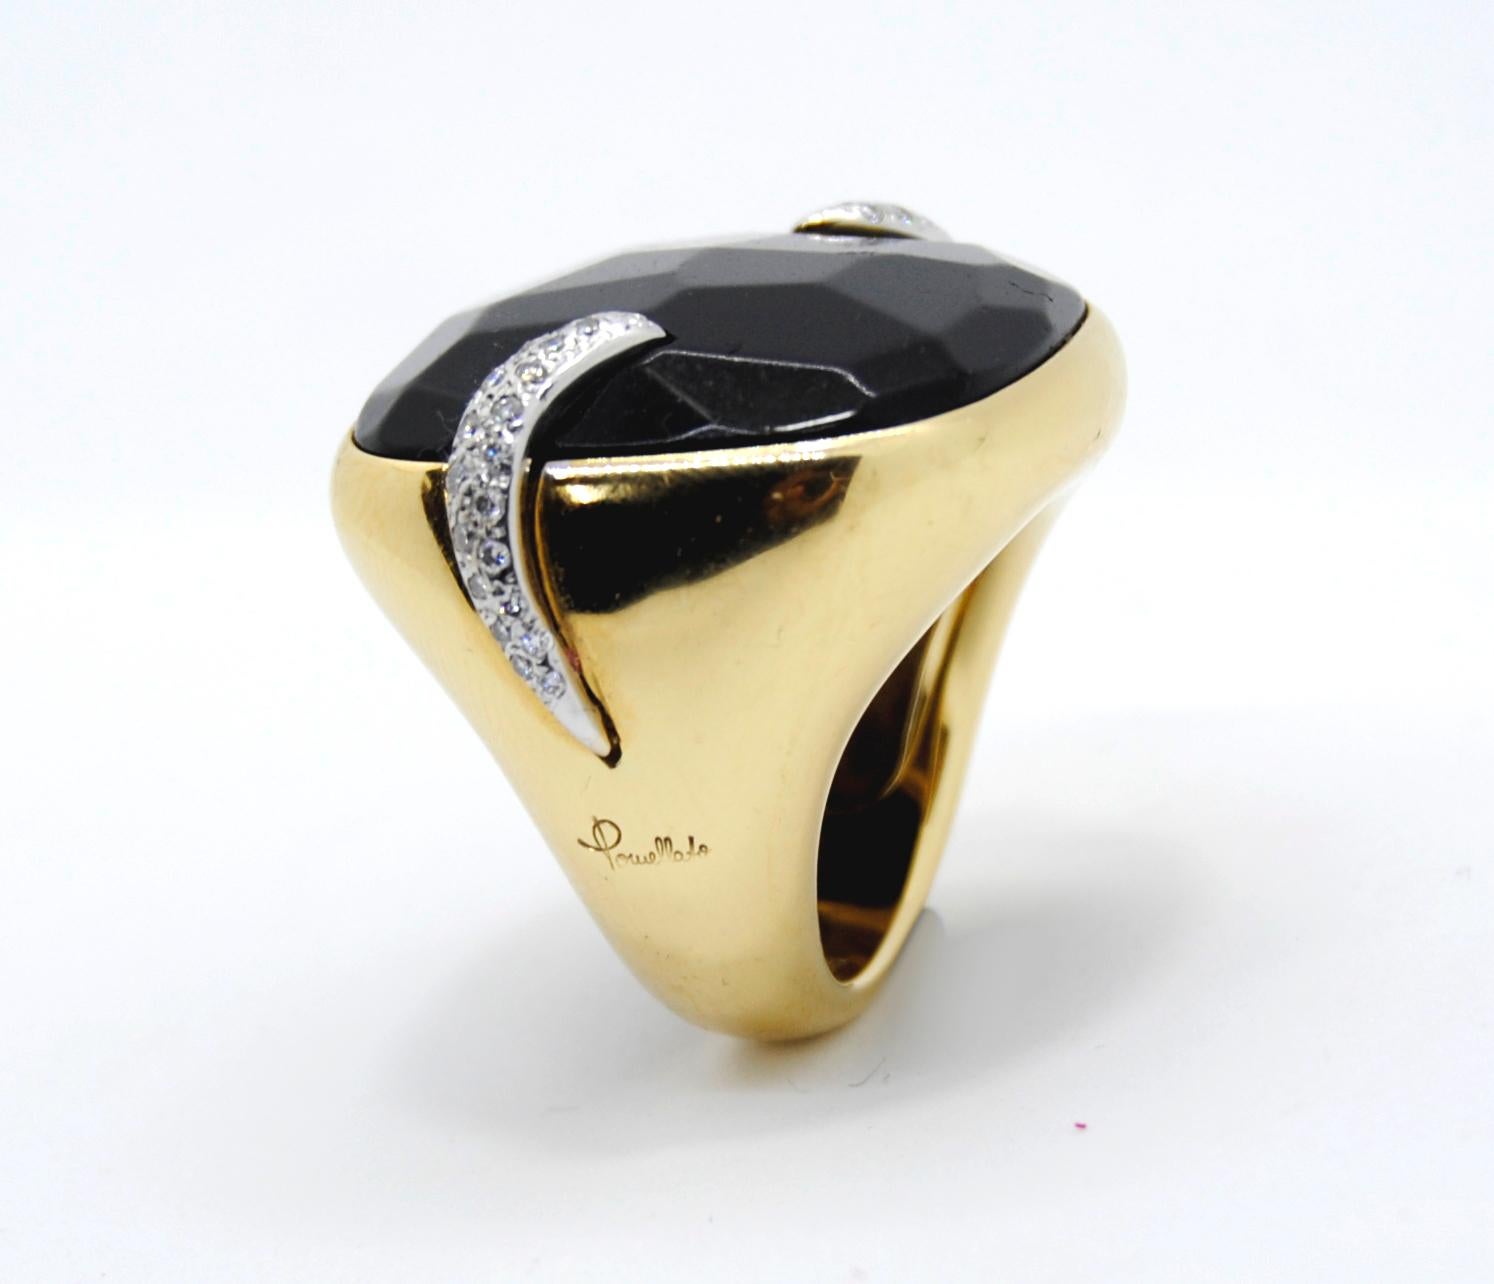 Our Shop carries International luxury brands and sometimes buys rests of Jewelry stocks at great deals and opportunities. 
The Victoria Black Jet Pomellato ring Retail Price is around 10.000€.

Synonymous with creativity and character in the